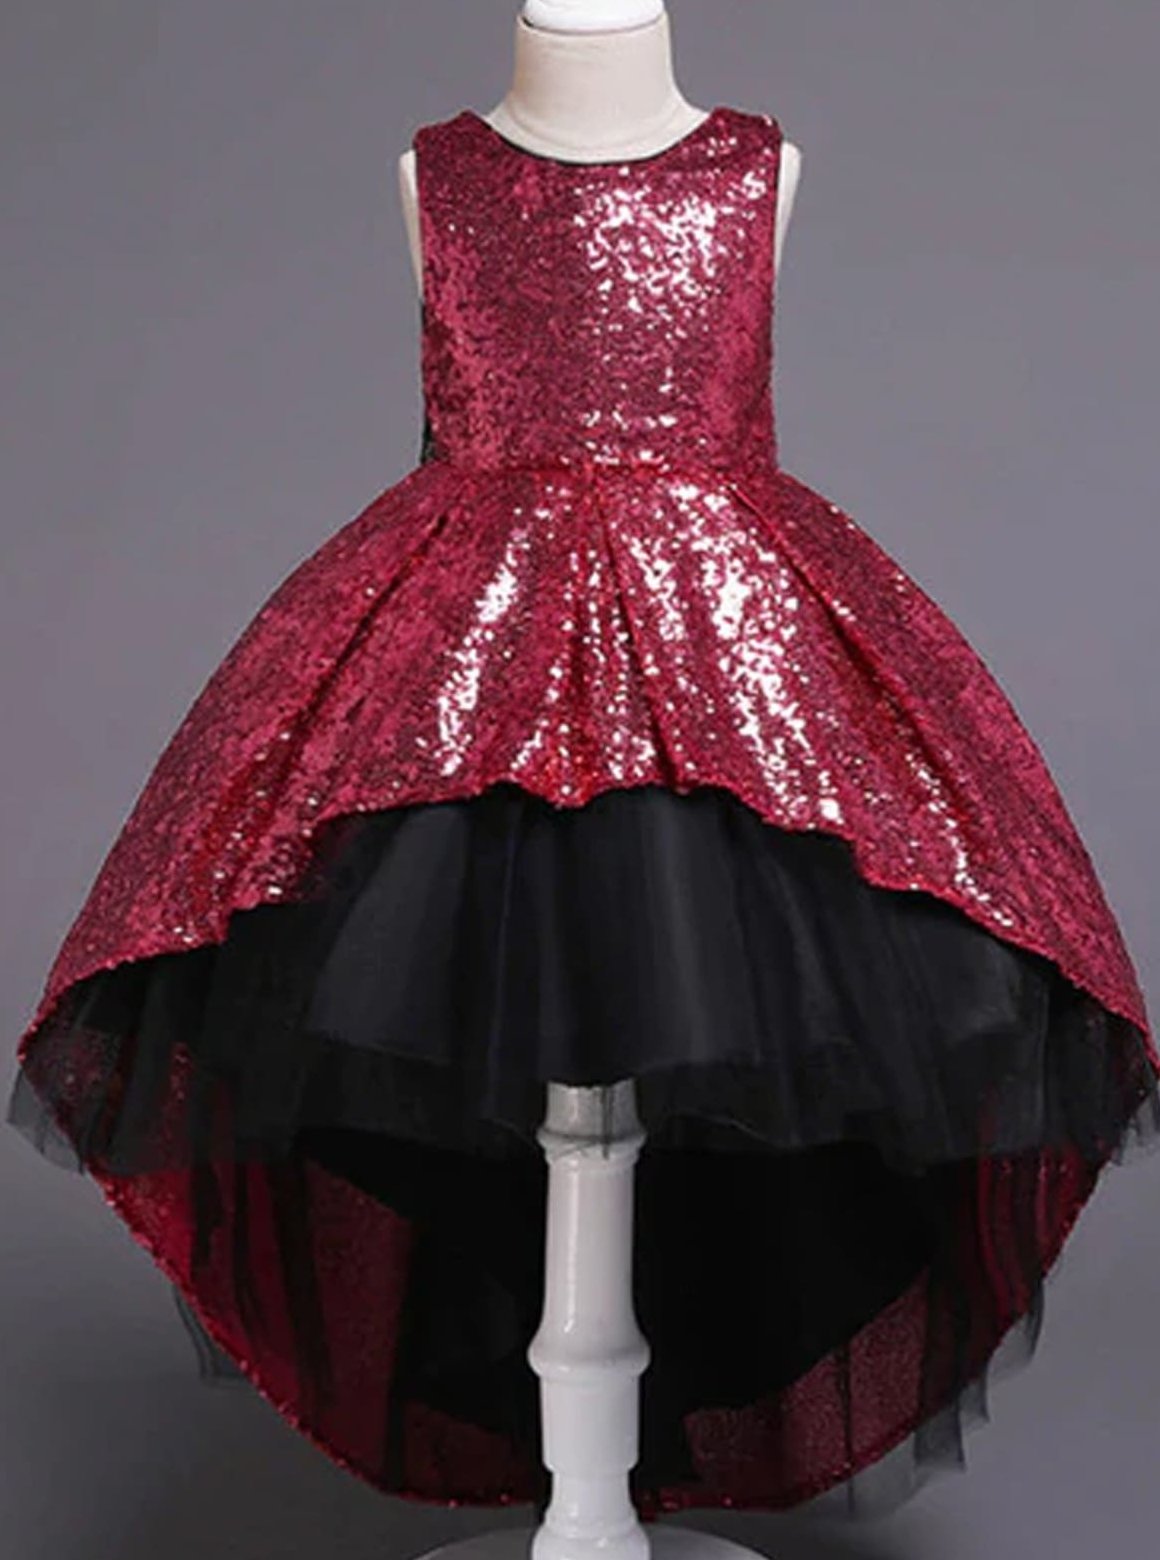 Winter Formal Dress | Girls Two Tone Sequin Hi-Lo Holiday Party Dress ...